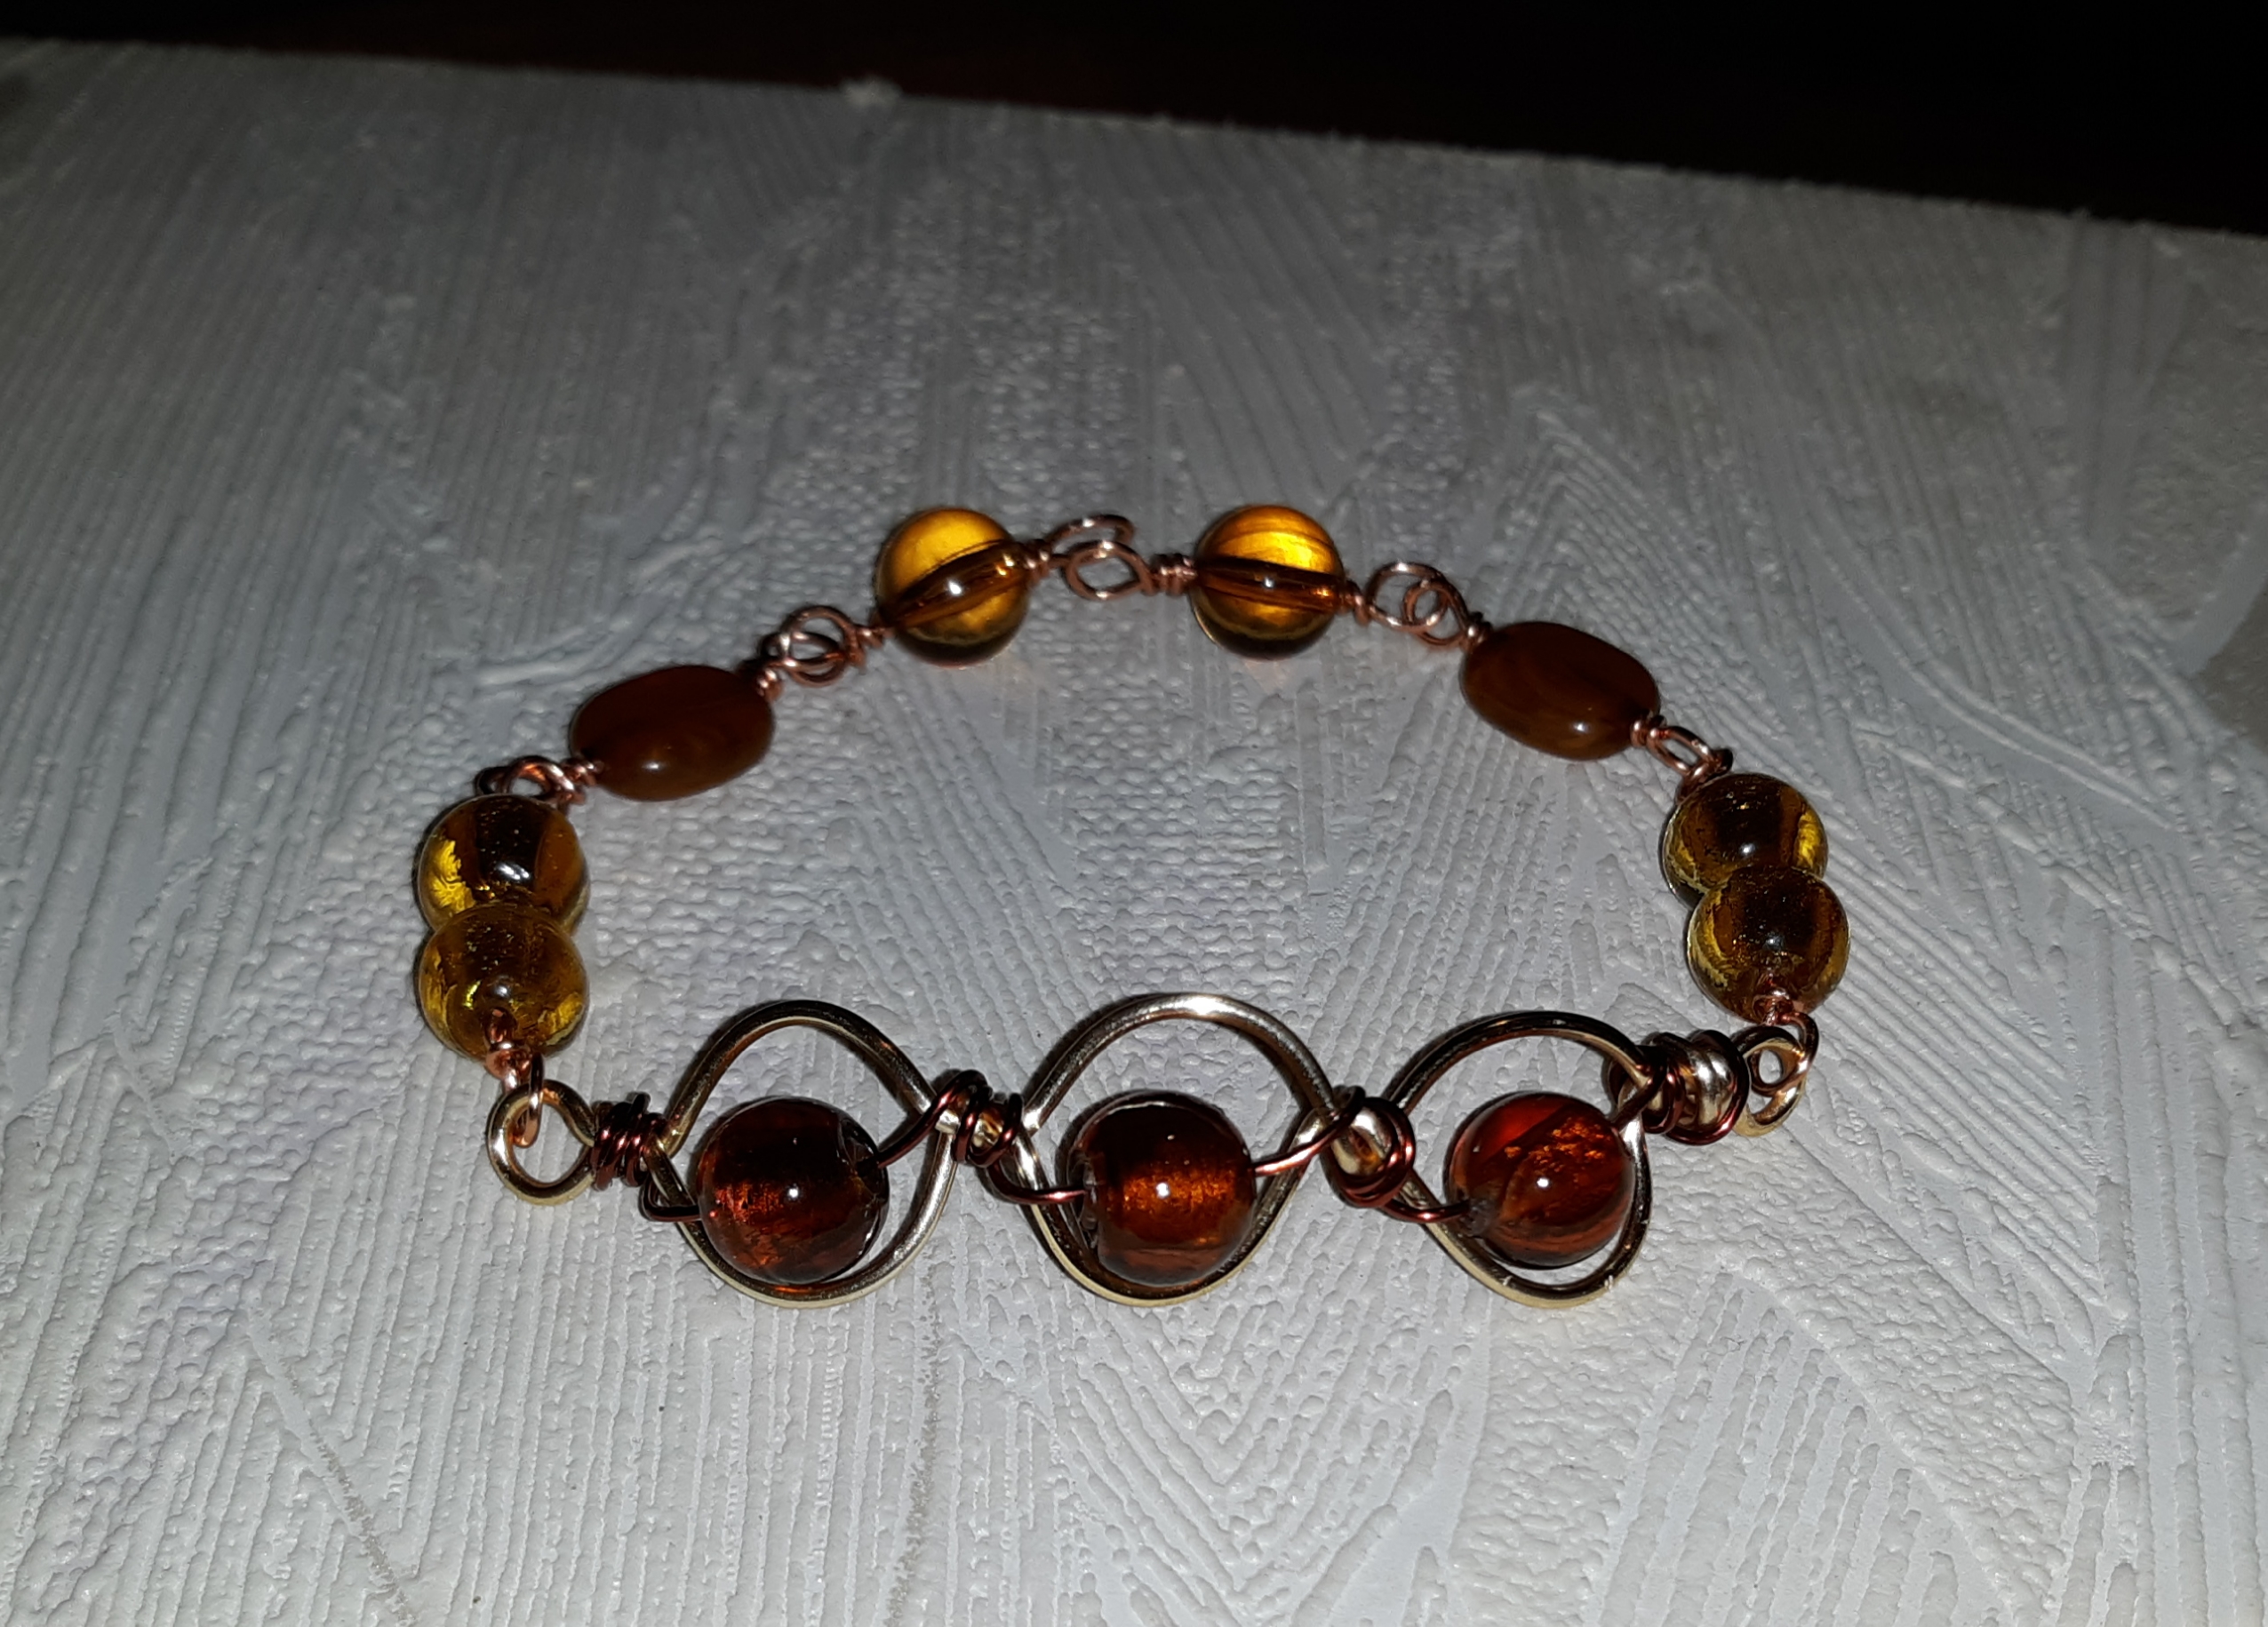 bead and wire bracelet